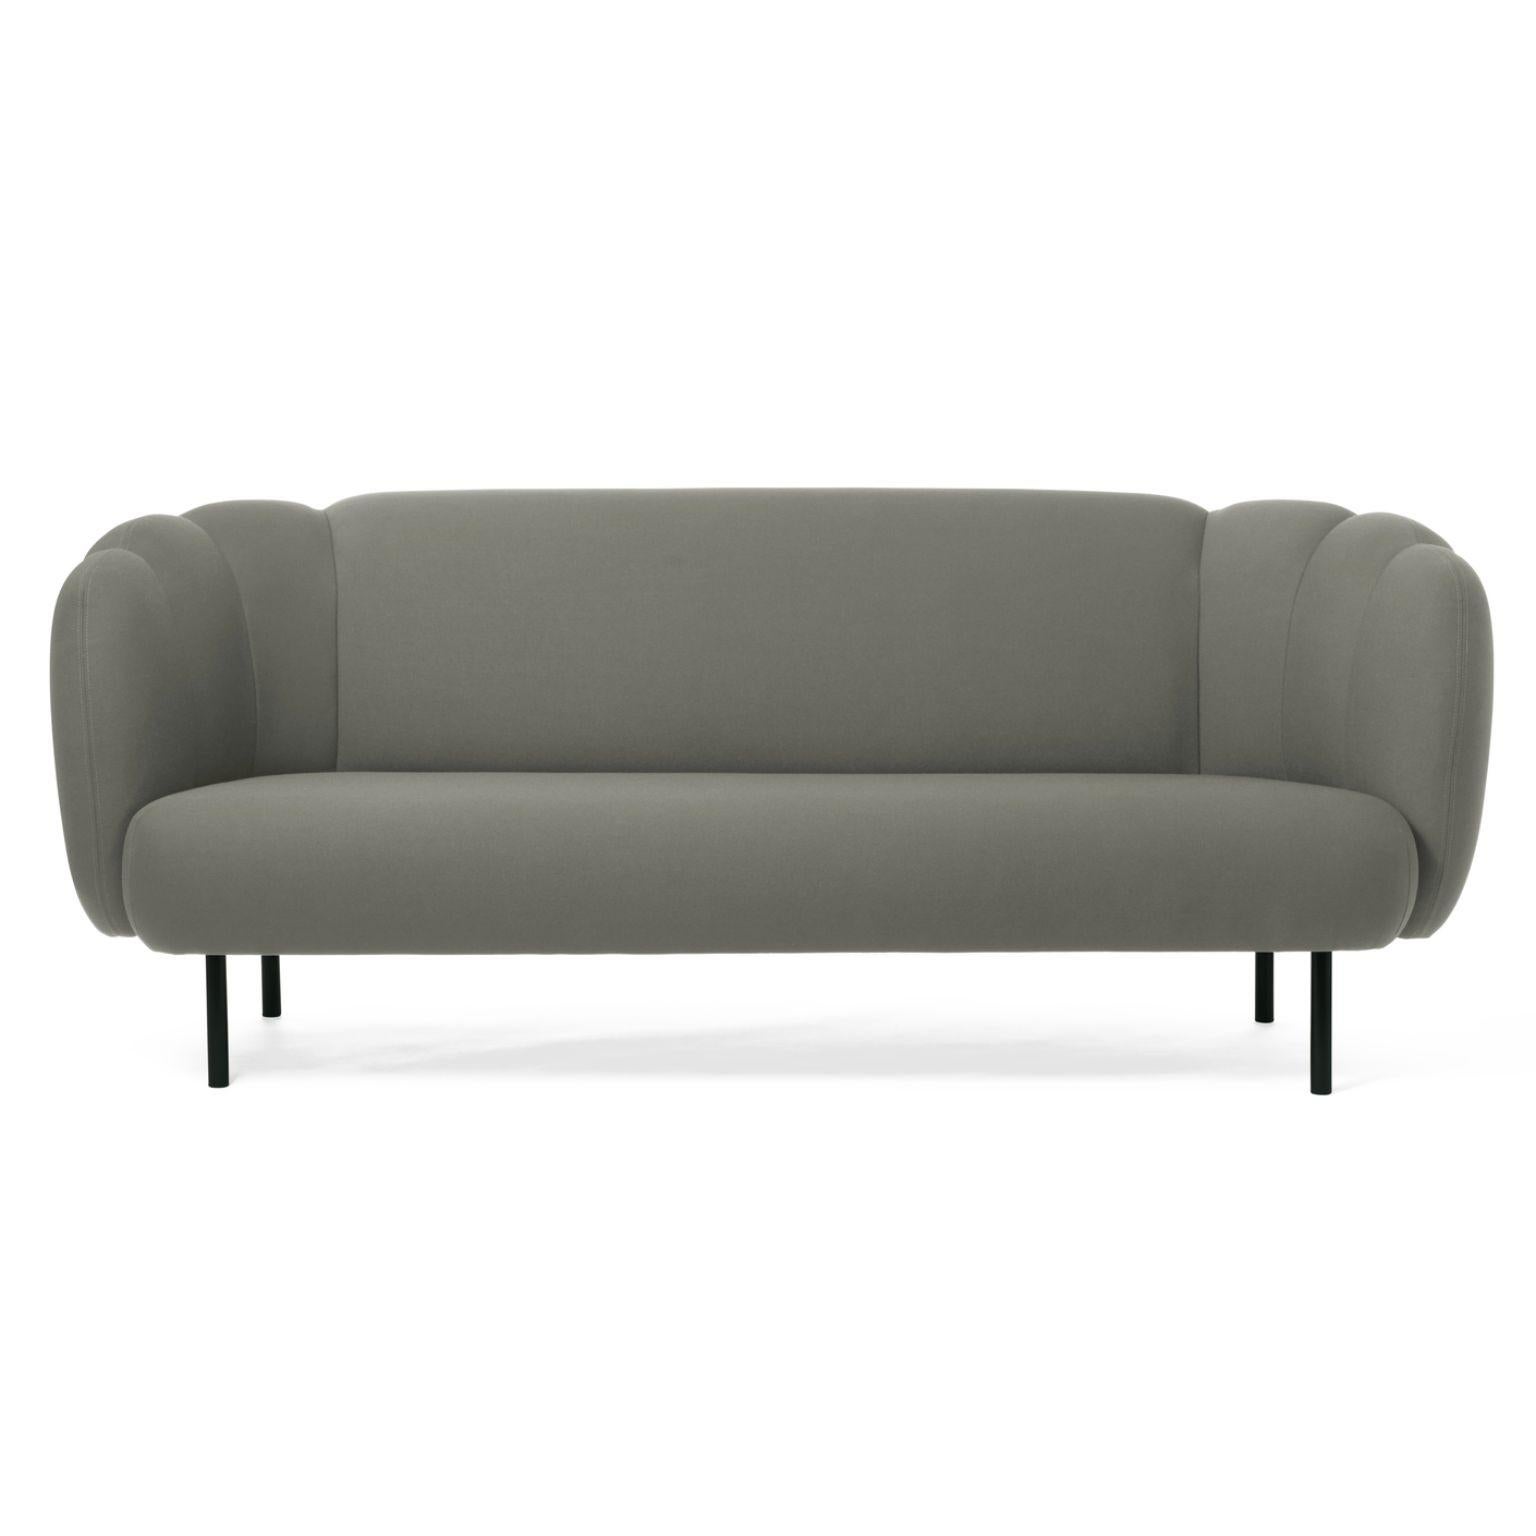 Caper 3 Seater With Stitches Warm Grey by Warm Nordic
Dimensions: D200 x W84 x H 80 cm
Material: Textile upholstery, Wooden frame, Powder coated black steel legs.
Weight: 55.5 kg
Also available in different colours and finishes. Please contact